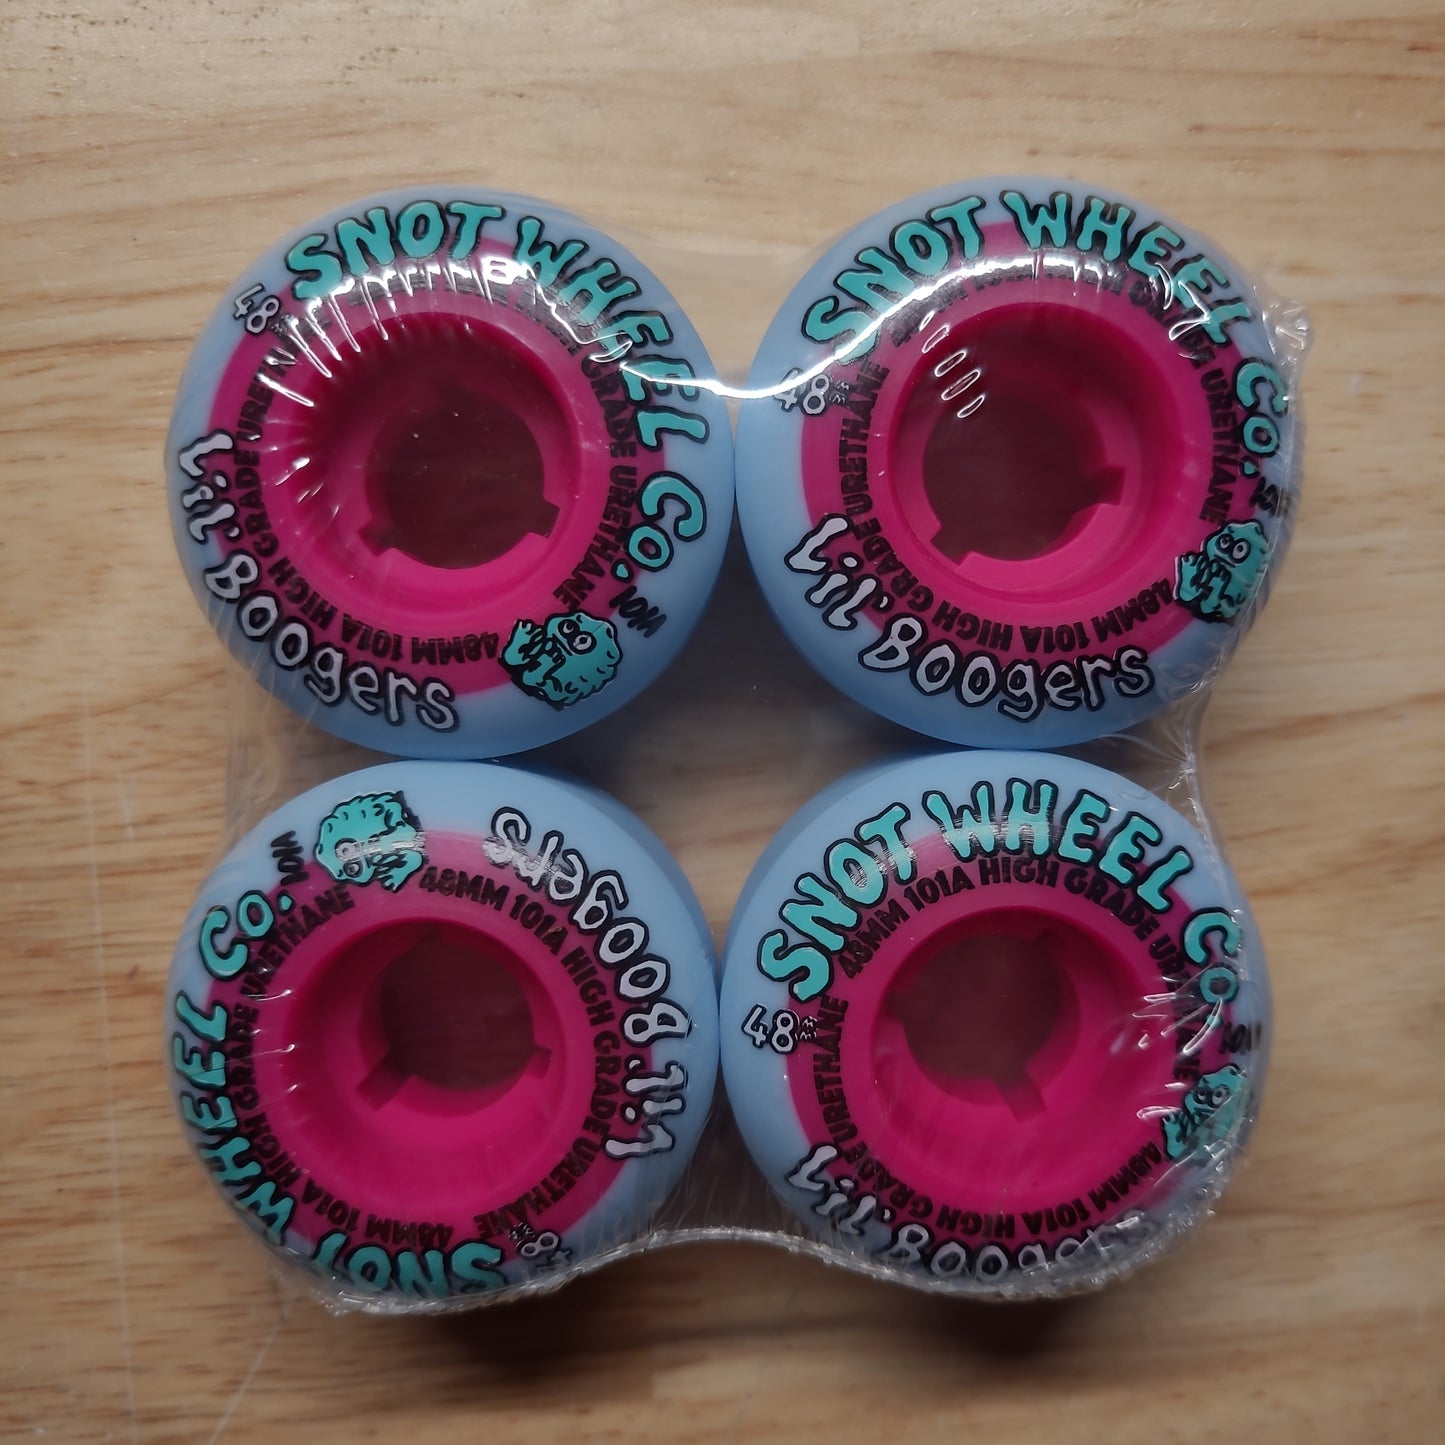 Snot Wheels - Lil Boogers 48mm 101A (Teal & Pink)